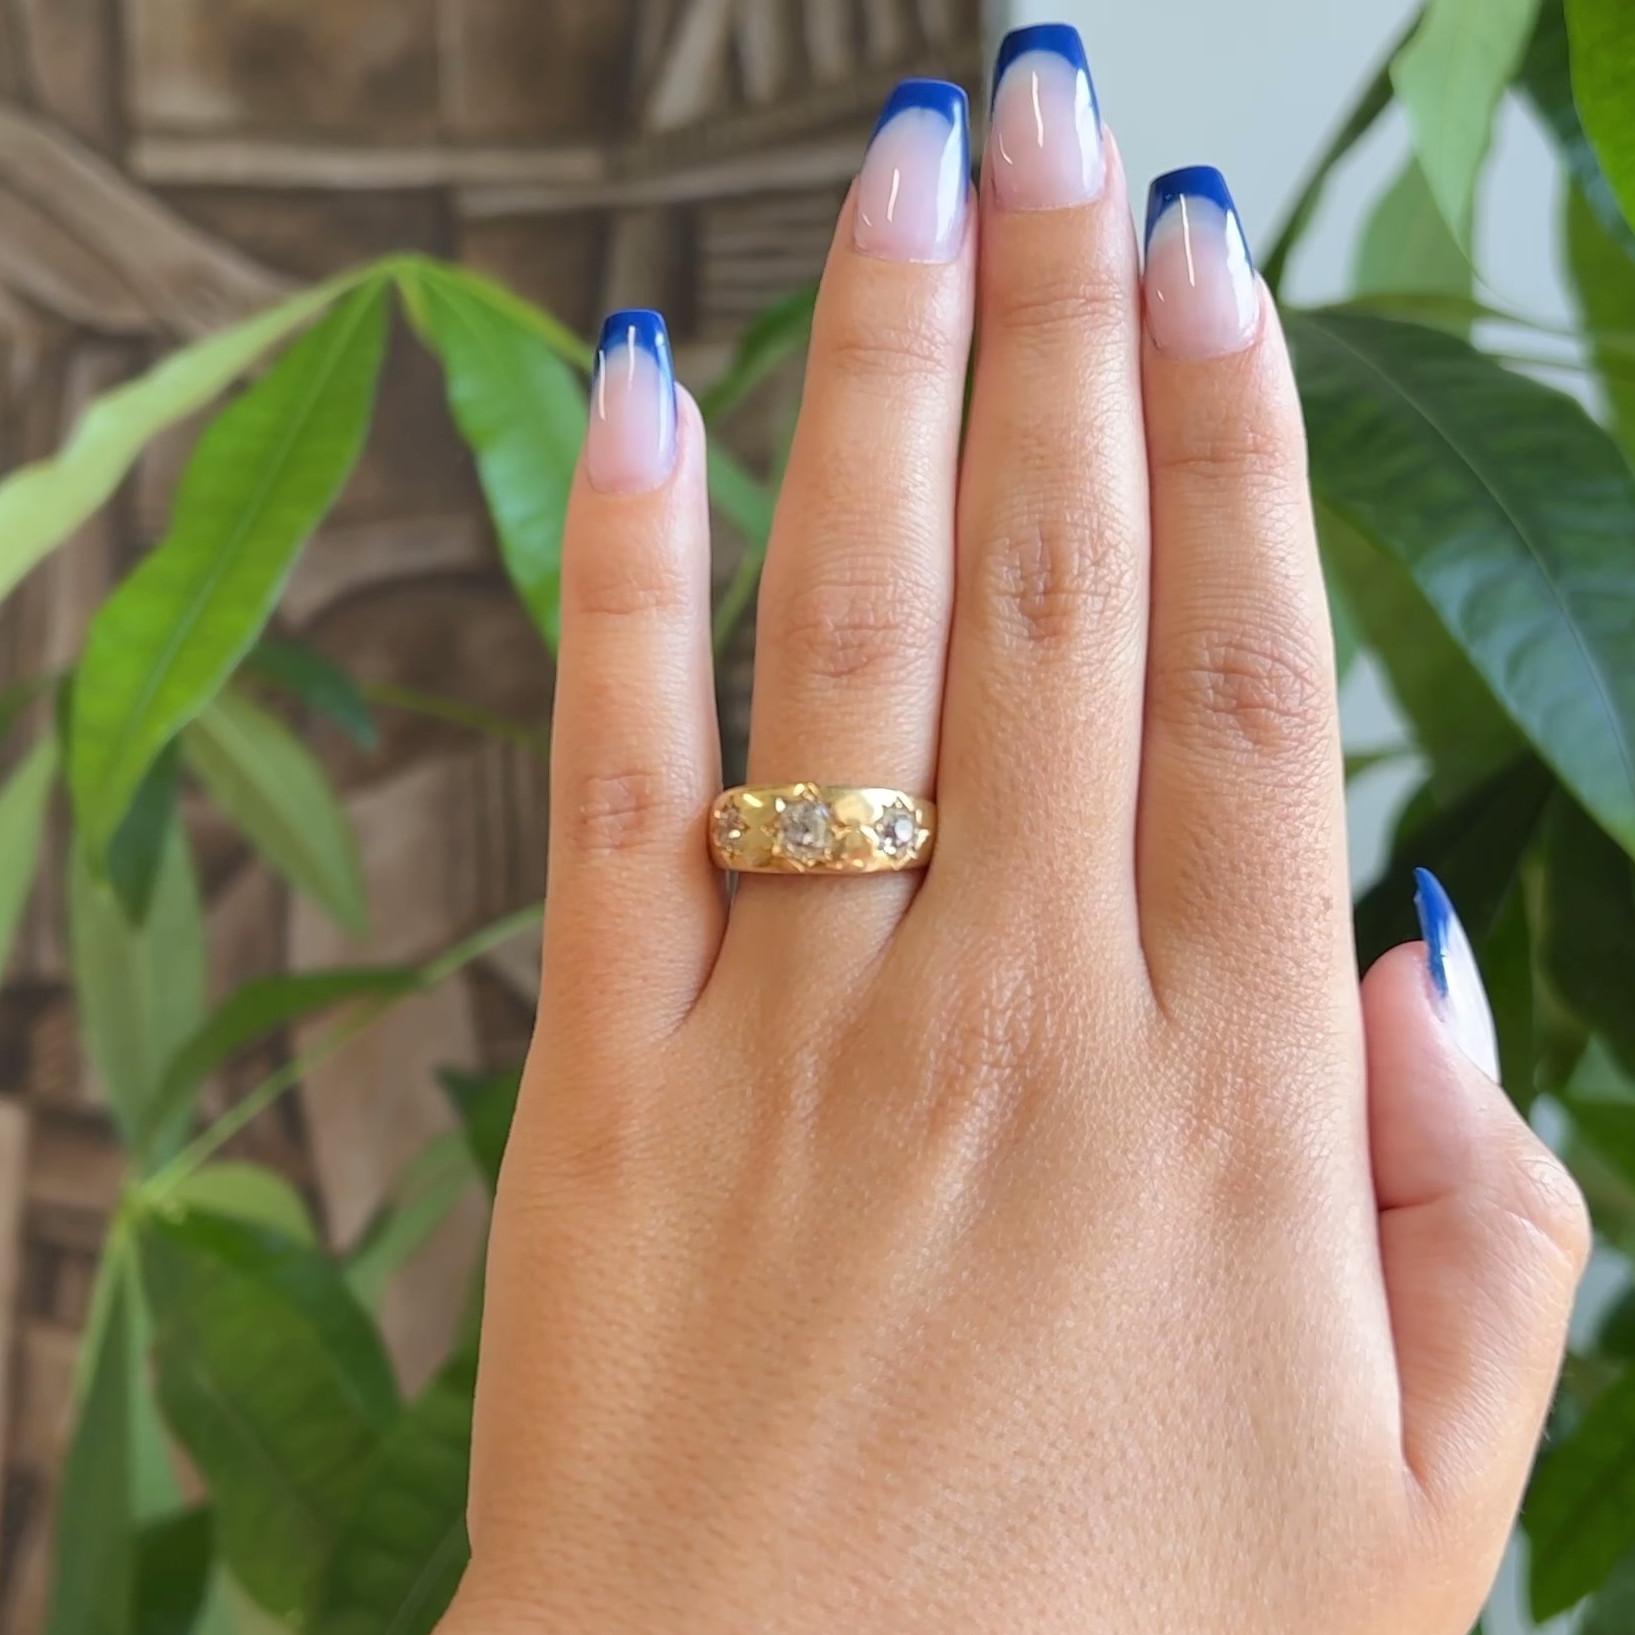 One Antique English 1.20 Carats Old Mine Cut Diamonds 18 Karat Yellow Gold Three Stone Ring. Featuring three old mine diamonds with a total weight of approximately 1.20 carats, graded I color VS clarity. Crafted in 18 karat yellow gold with English